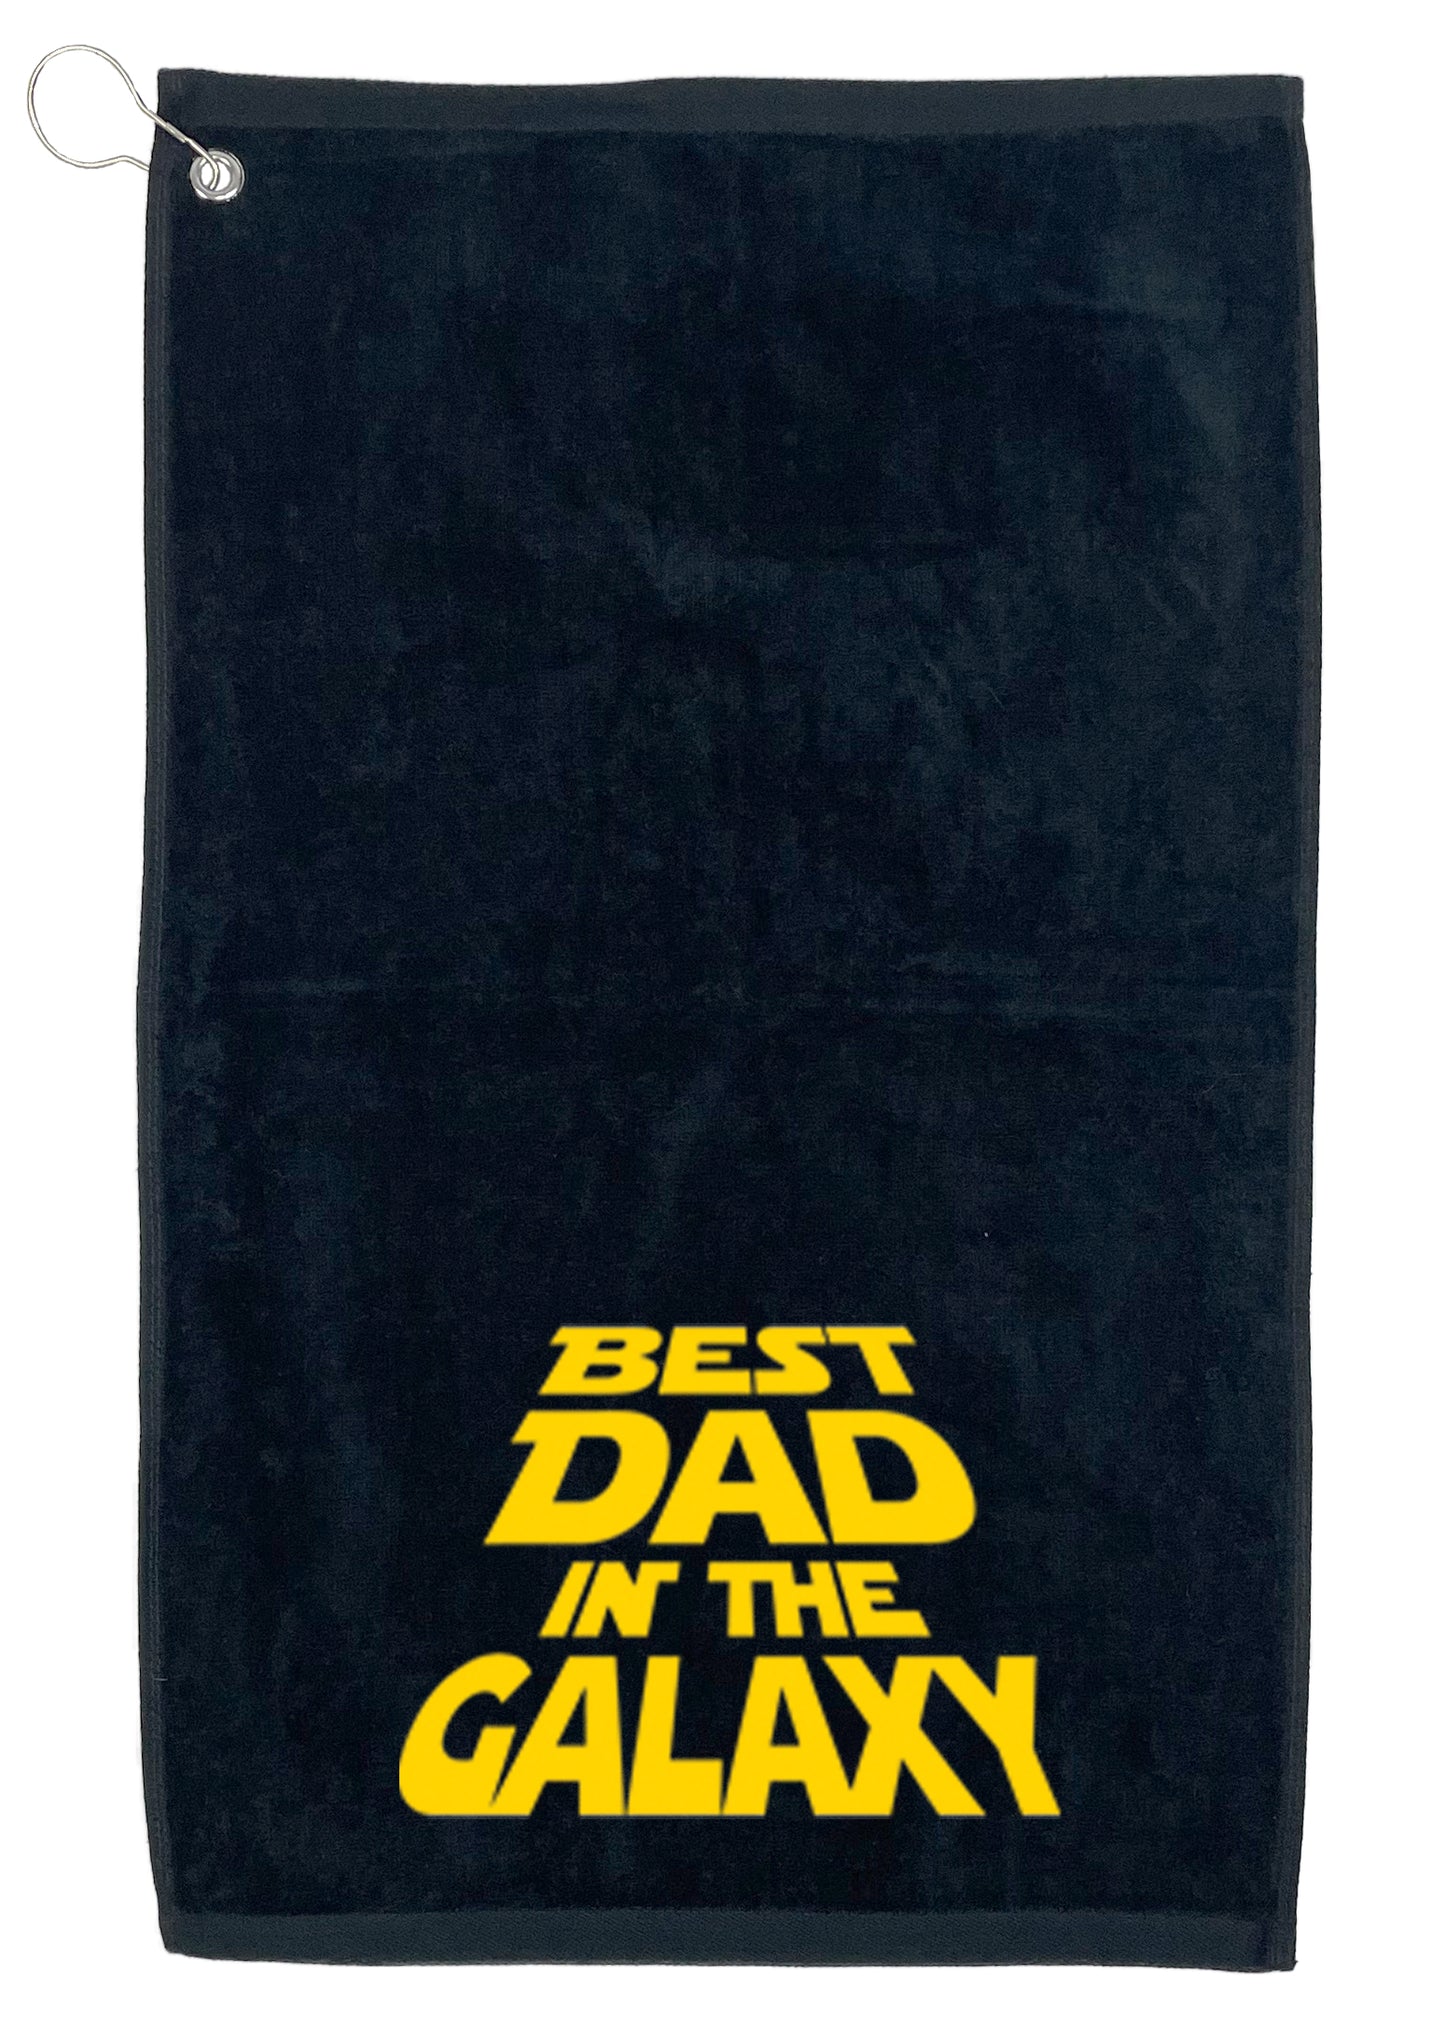 Best Dad In The Galaxy, Golf Towel - Funny T Shirts & Graphic Tees